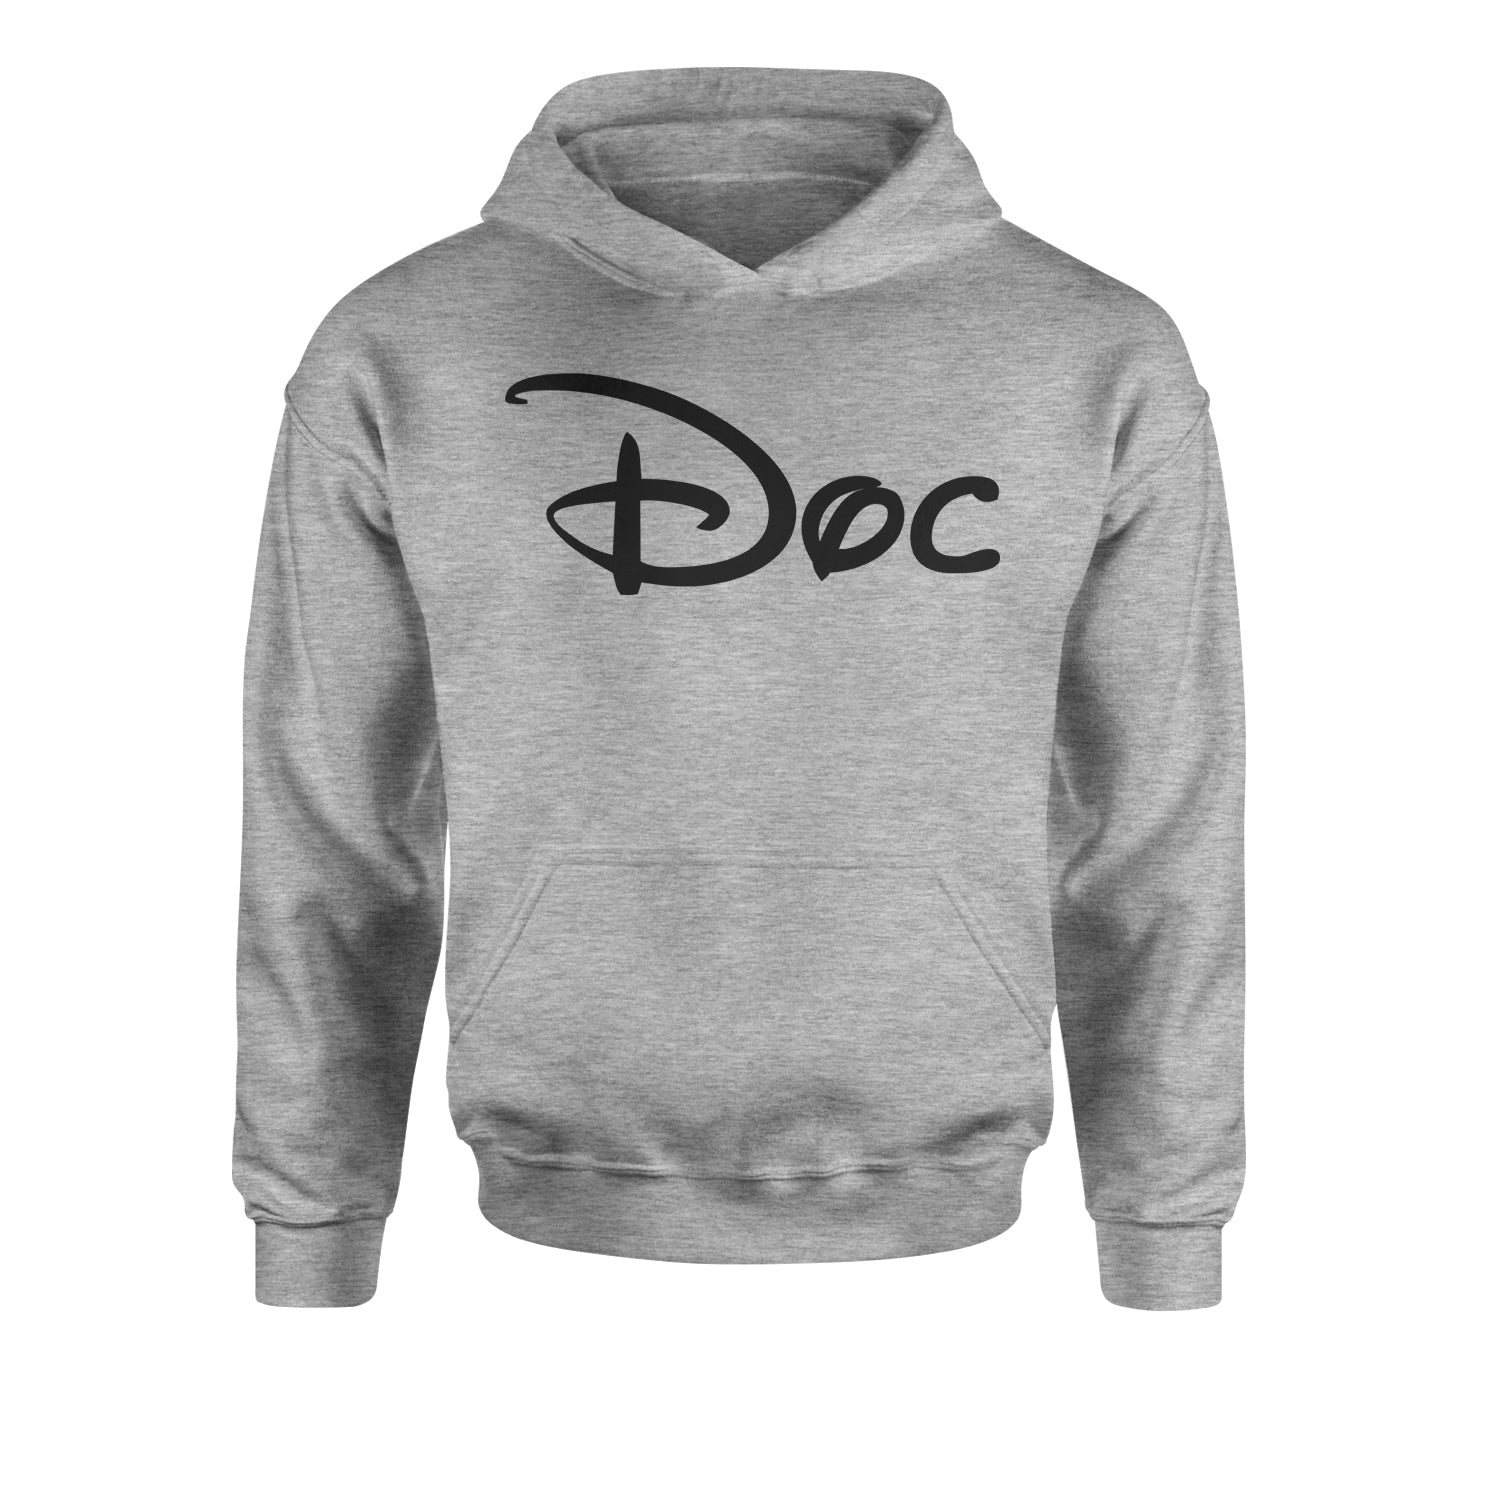 Doc - 7 Dwarfs Costume Youth-Sized Hoodie and, costume, dwarfs, group, halloween, matching, seven, snow, the, white by Expression Tees